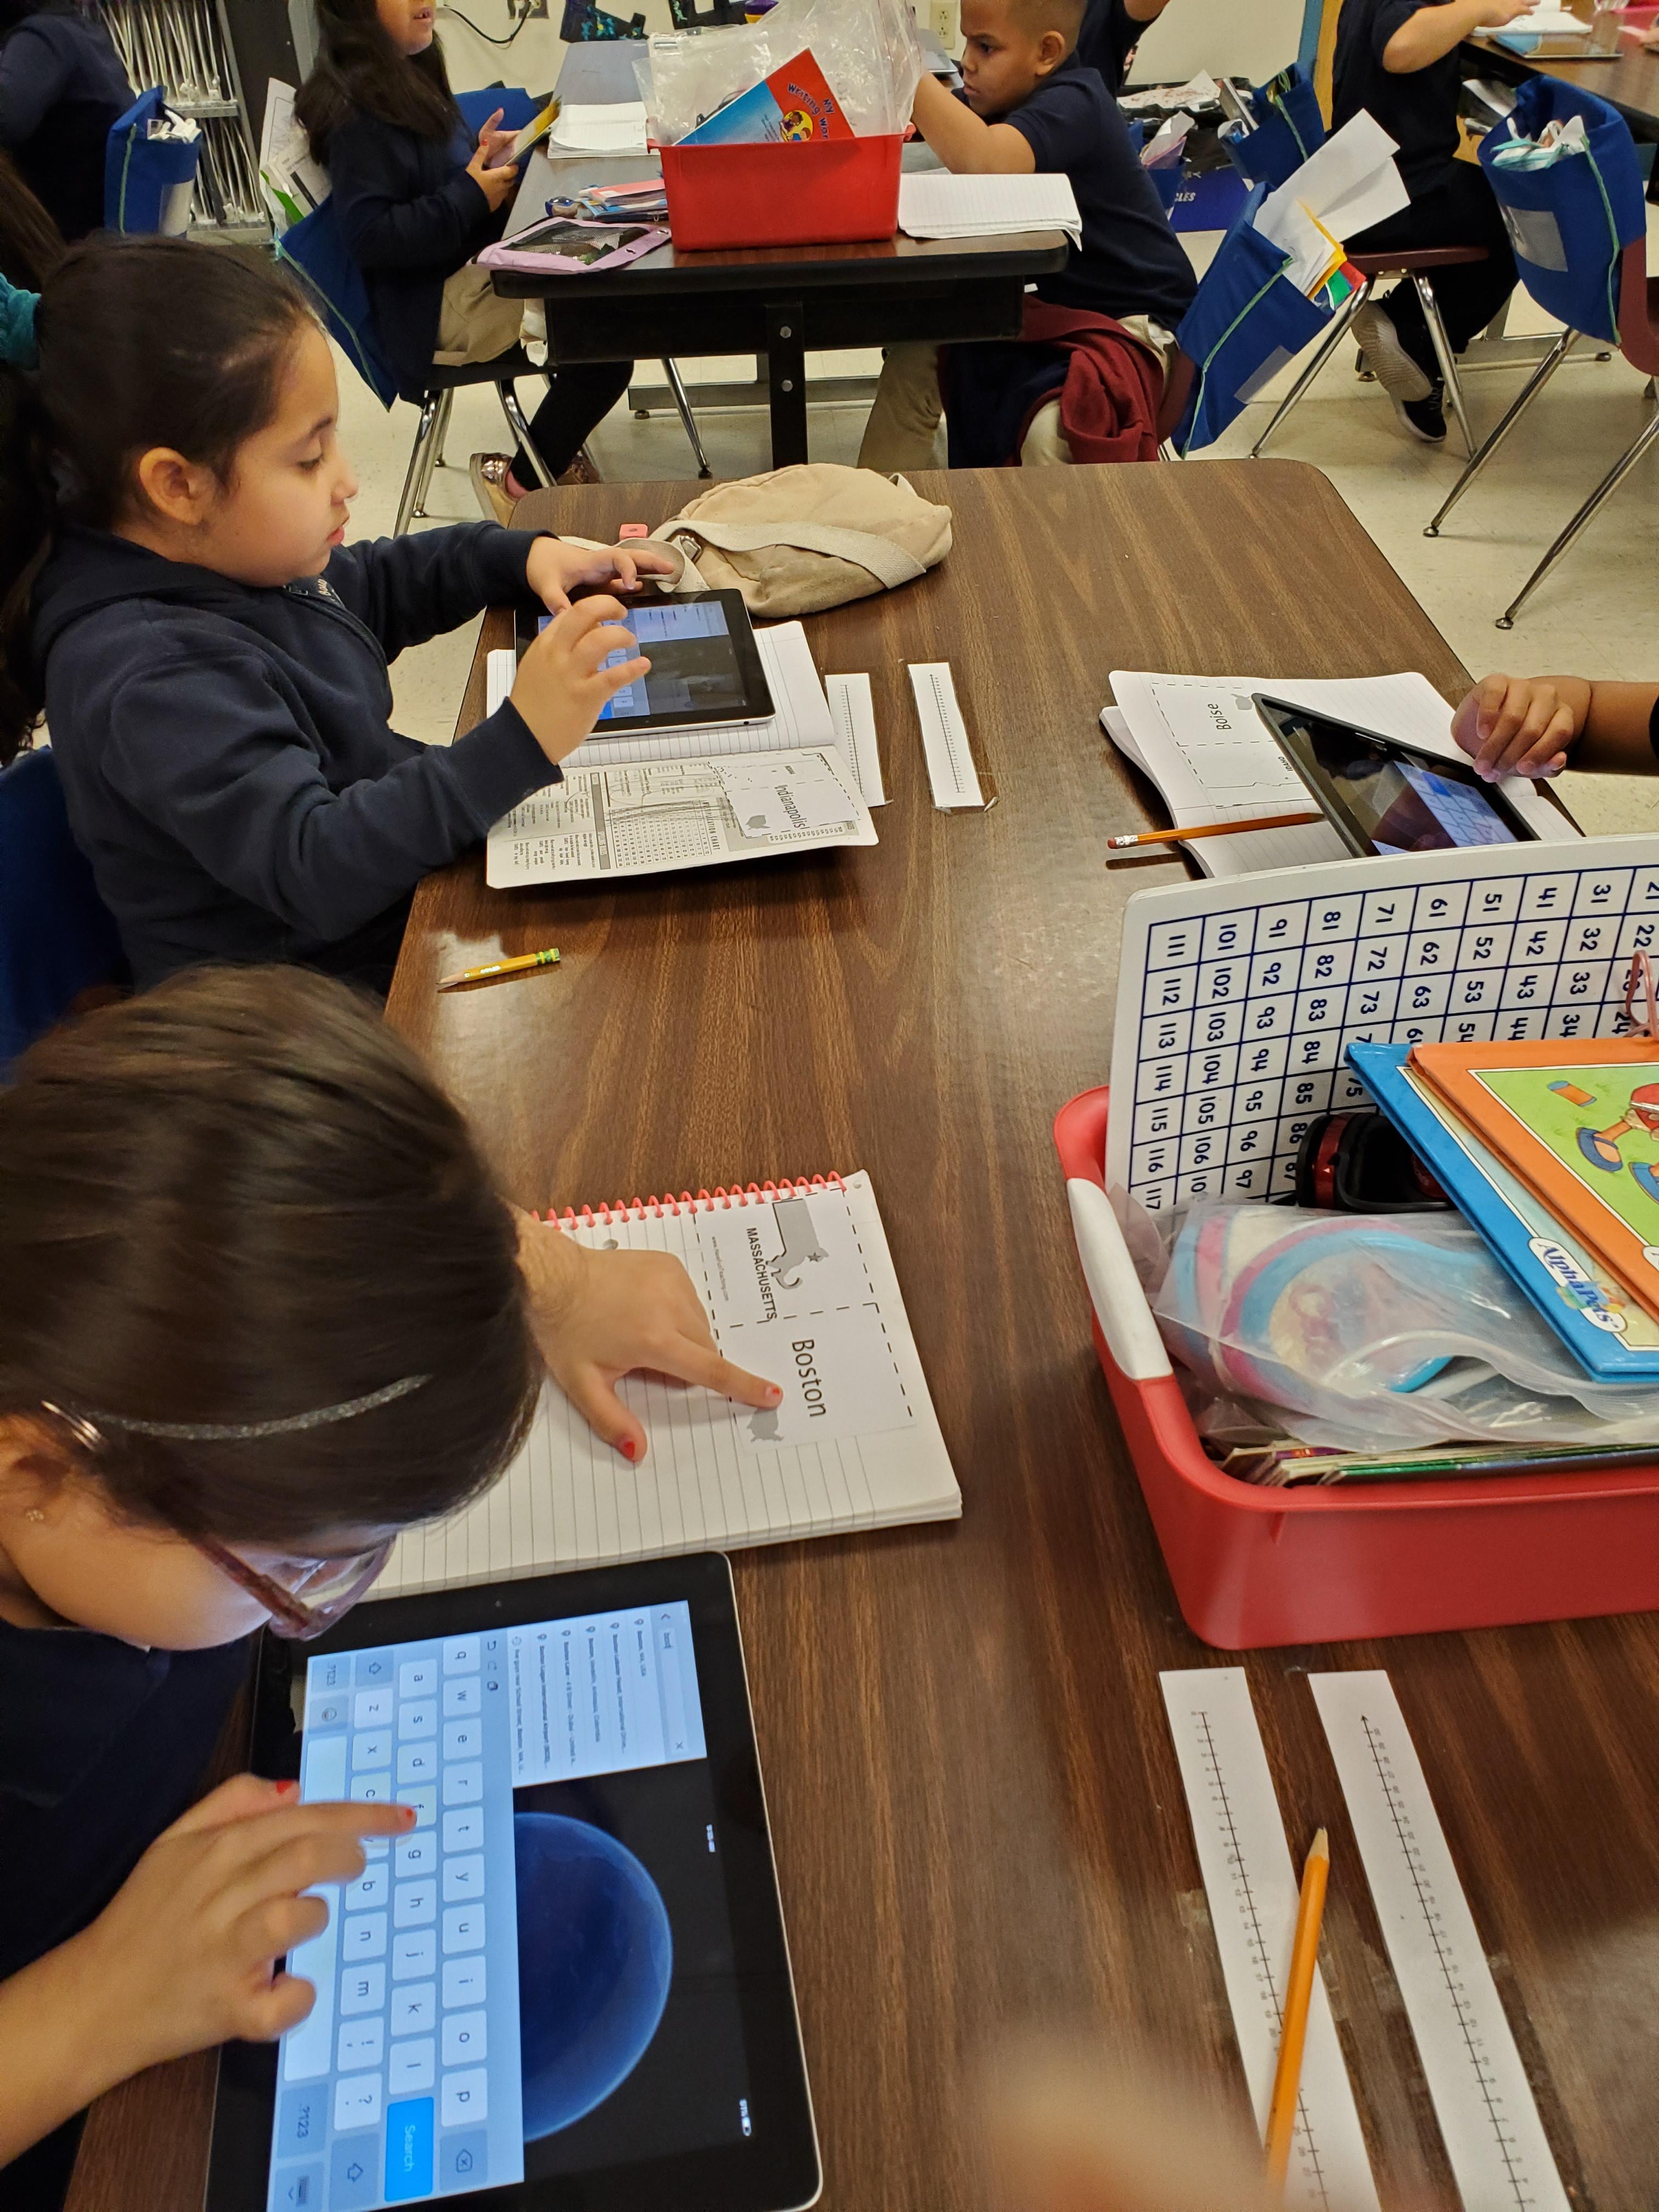 several children seated at desks with designated cities and using ipads to look the up